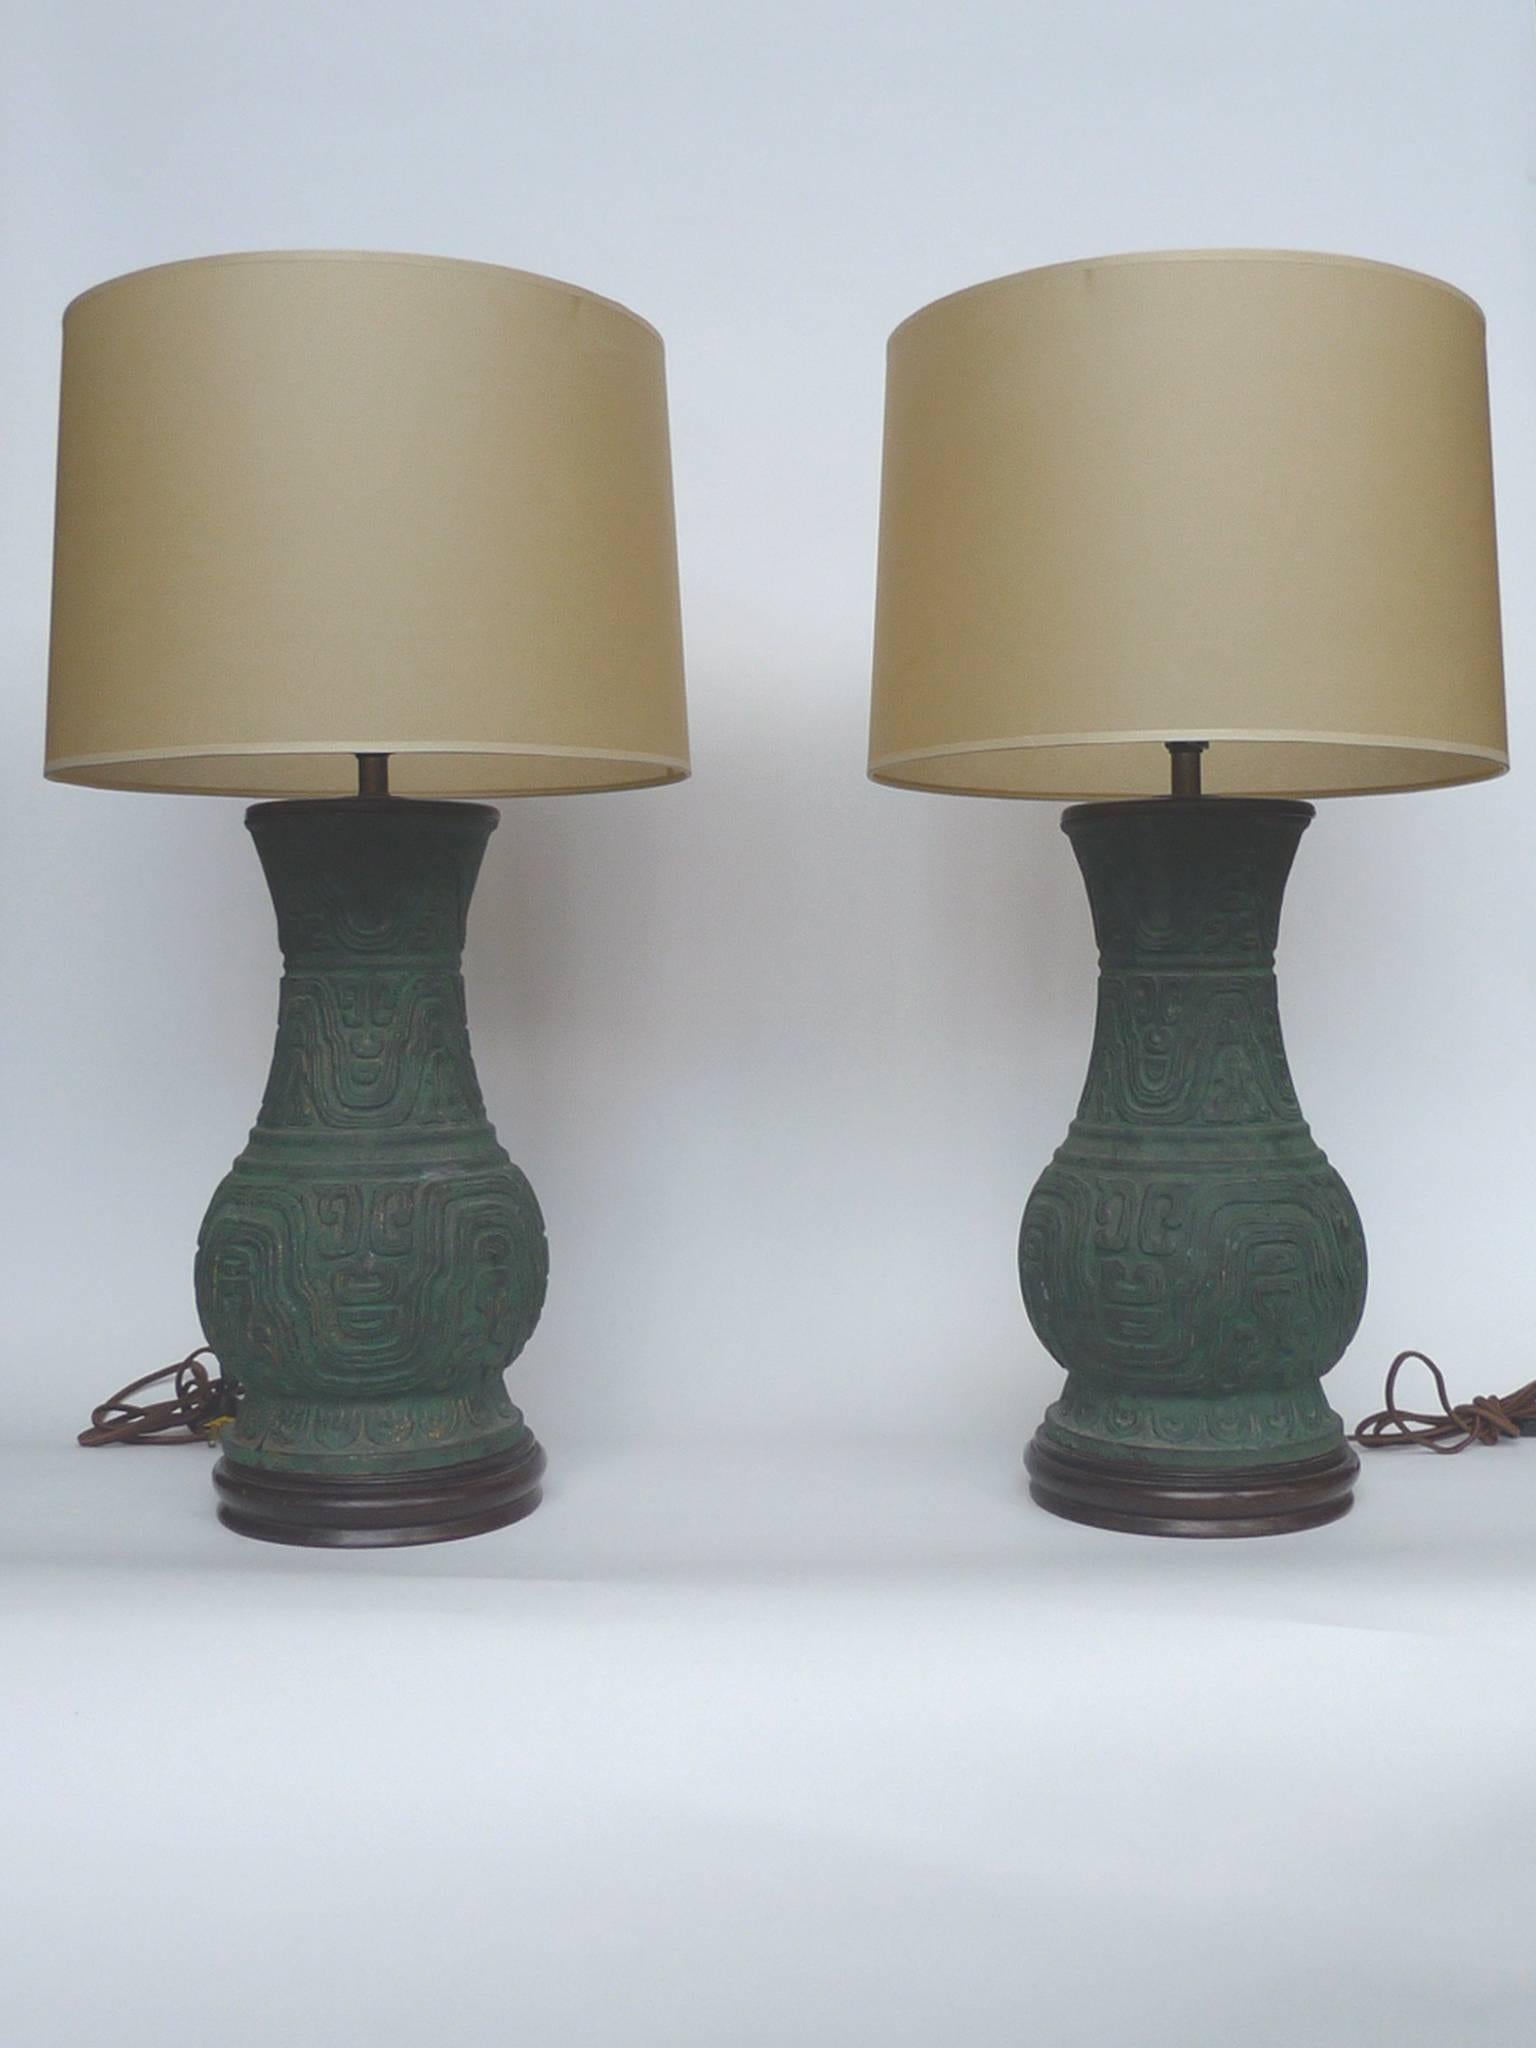 These two Chinese table lamps have bronze bodies capped with at the top and secured to a wooden base. The patina of the bronze is a gorgeous oxide green. These lamps are newly rewired and paired with new parchment shades with silk trimming. With a